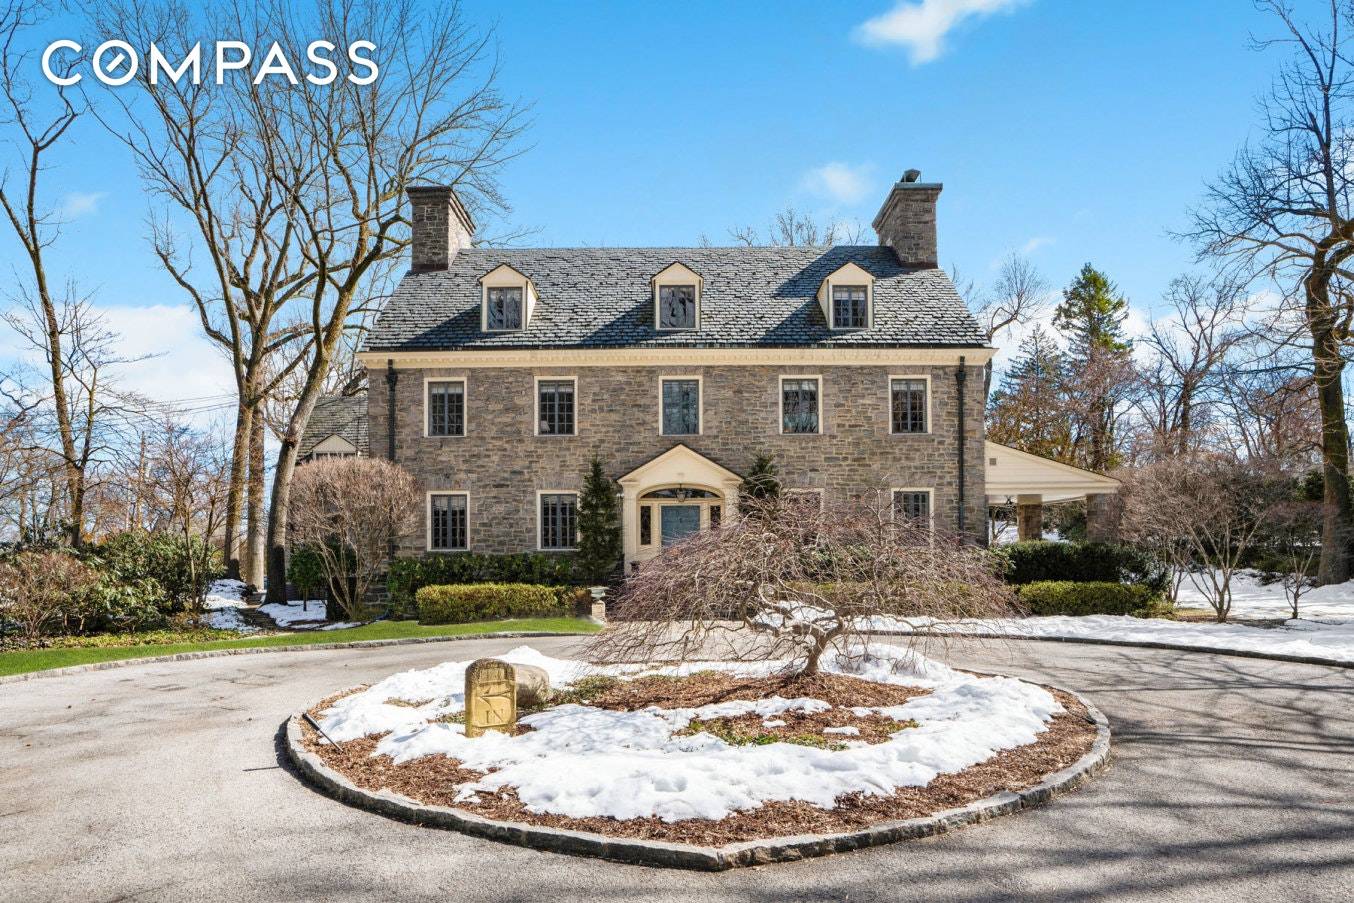 Gorgeous Georgian Revival Fieldstone House in Park like SettingThis stately Georgian Revival Fieldstone house is located in the heart of Fieldston, a private streeted community, on 1.